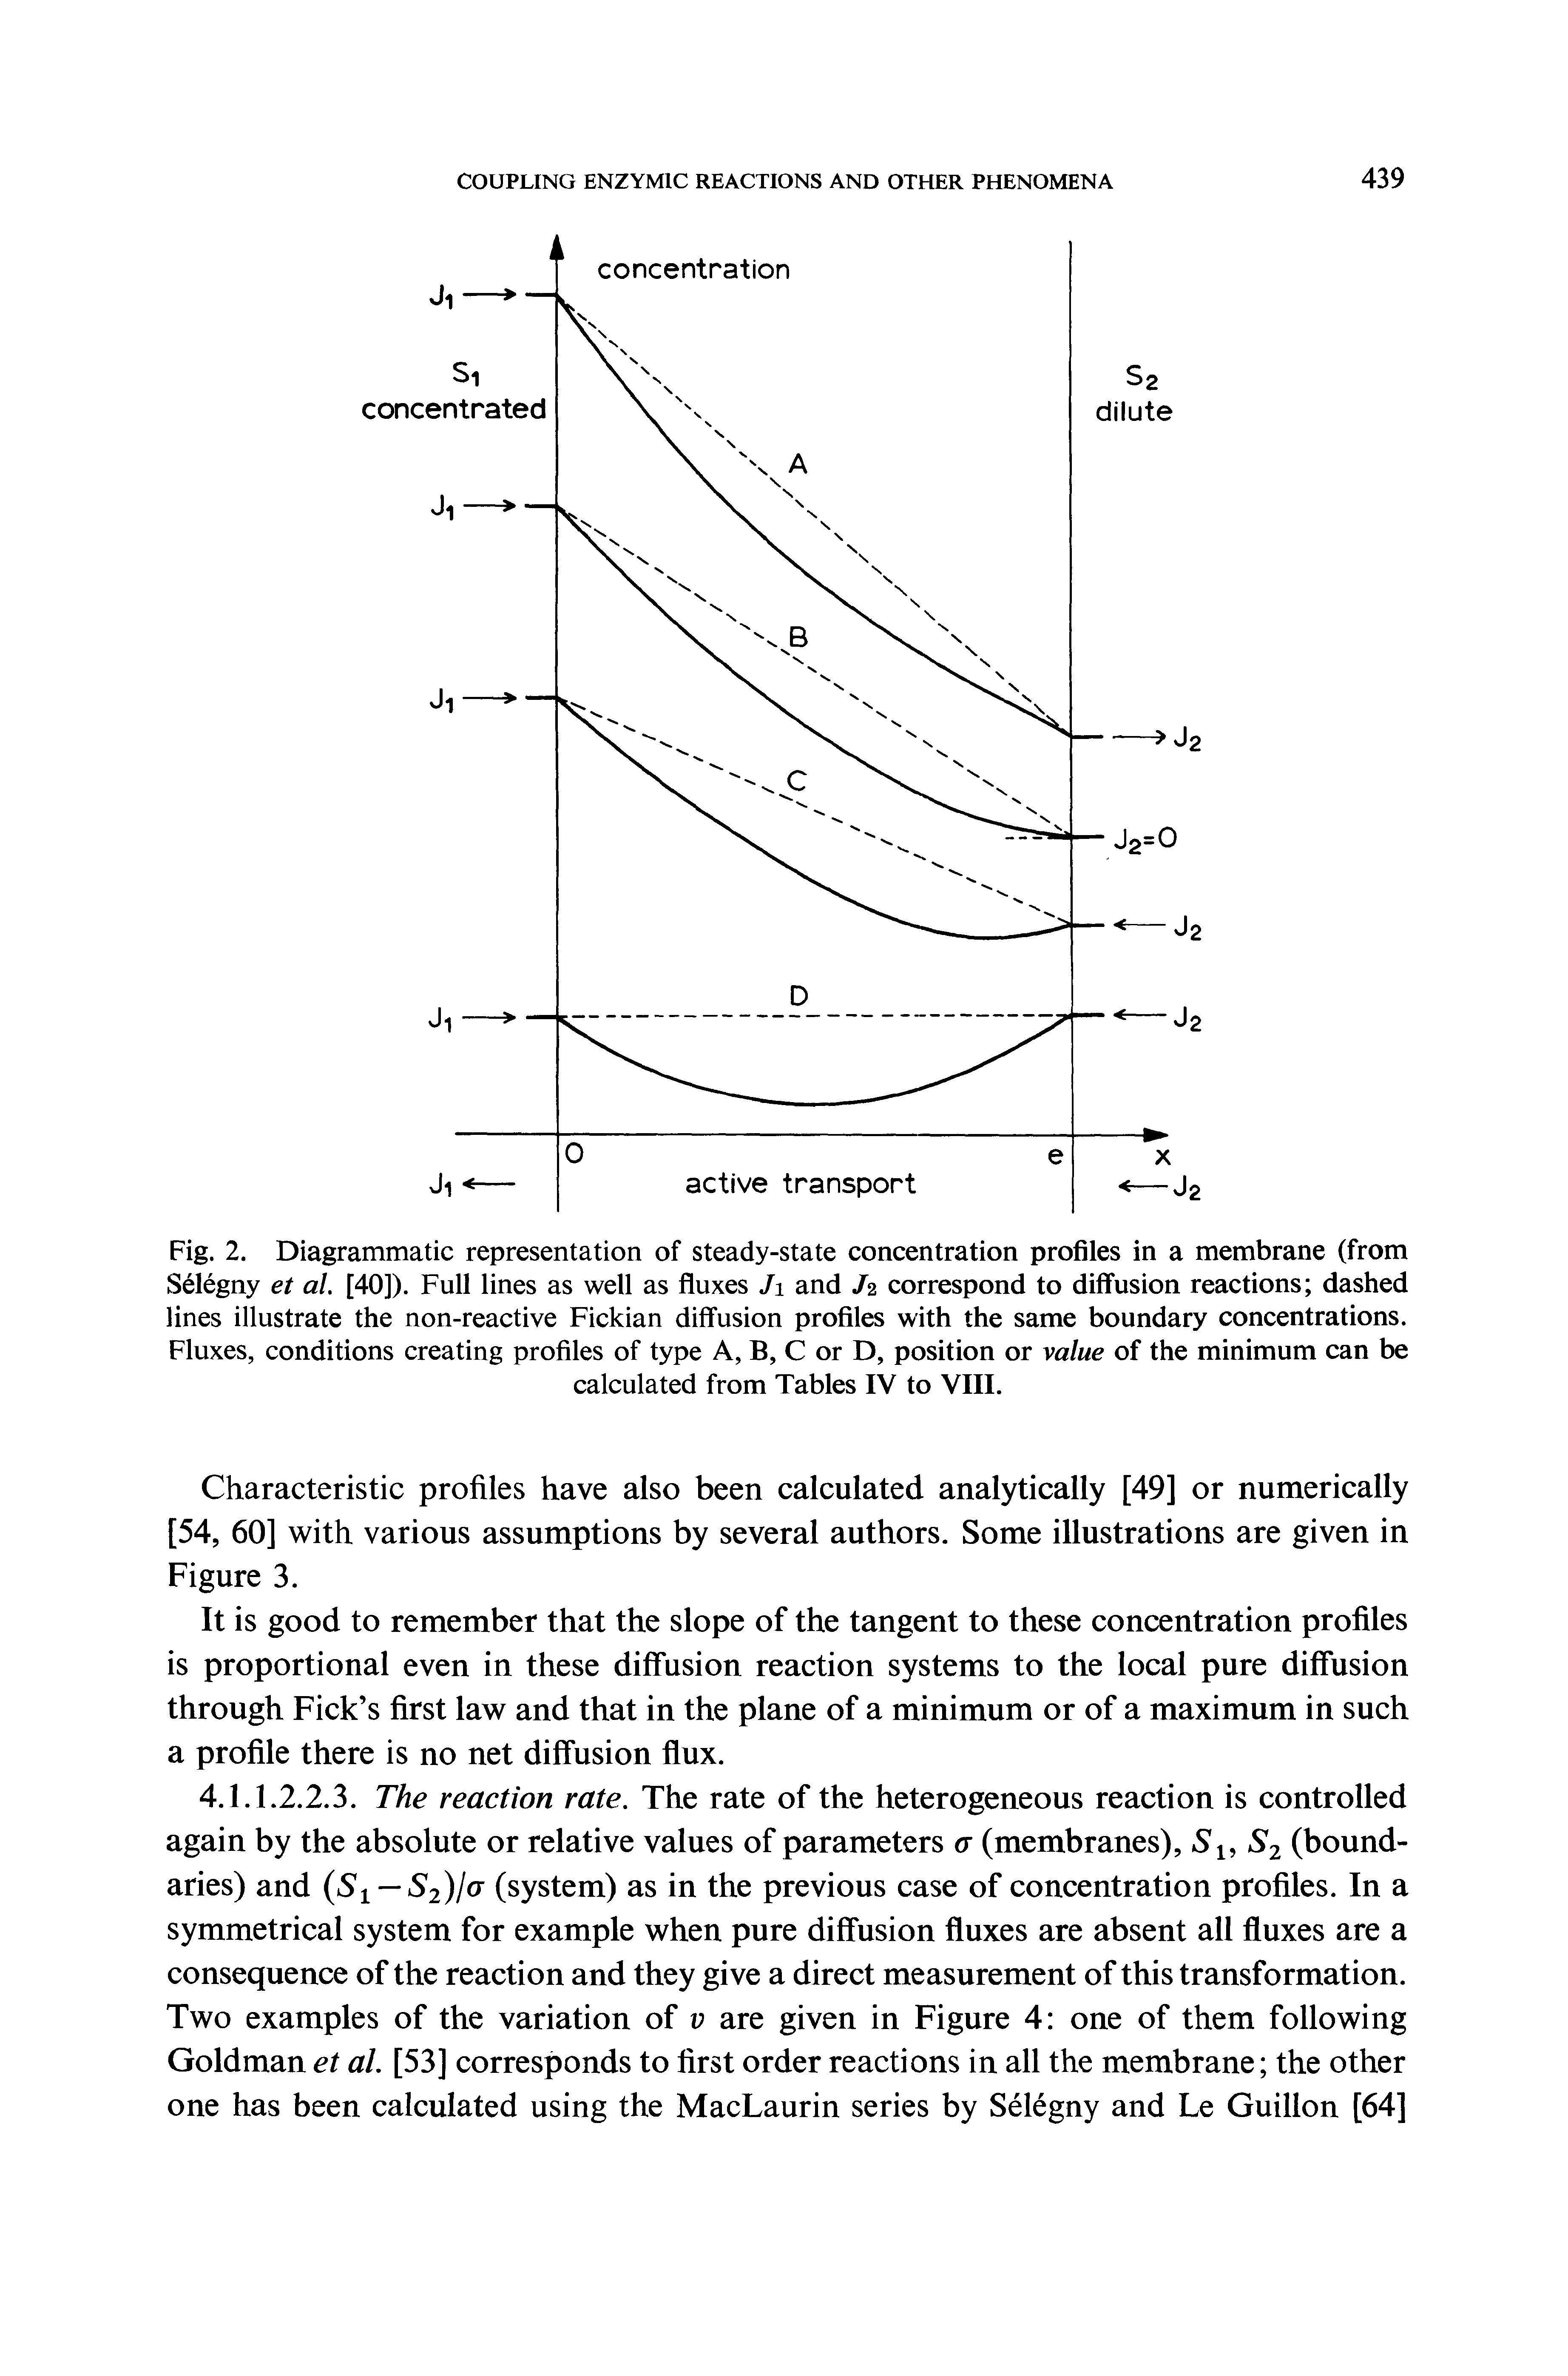 Fig. 2. Diagrammatic representation of steady-state concentration profiles in a membrane (from S61egny et al. [40]). Full lines as well as fluxes Ji and J2 correspond to diffusion reactions dashed lines illustrate the non-reactive Fickian diffusion profiles with the same boundary concentrations. Fluxes, conditions creating profiles of type A, B, C or D, position or value of the minimum can be...